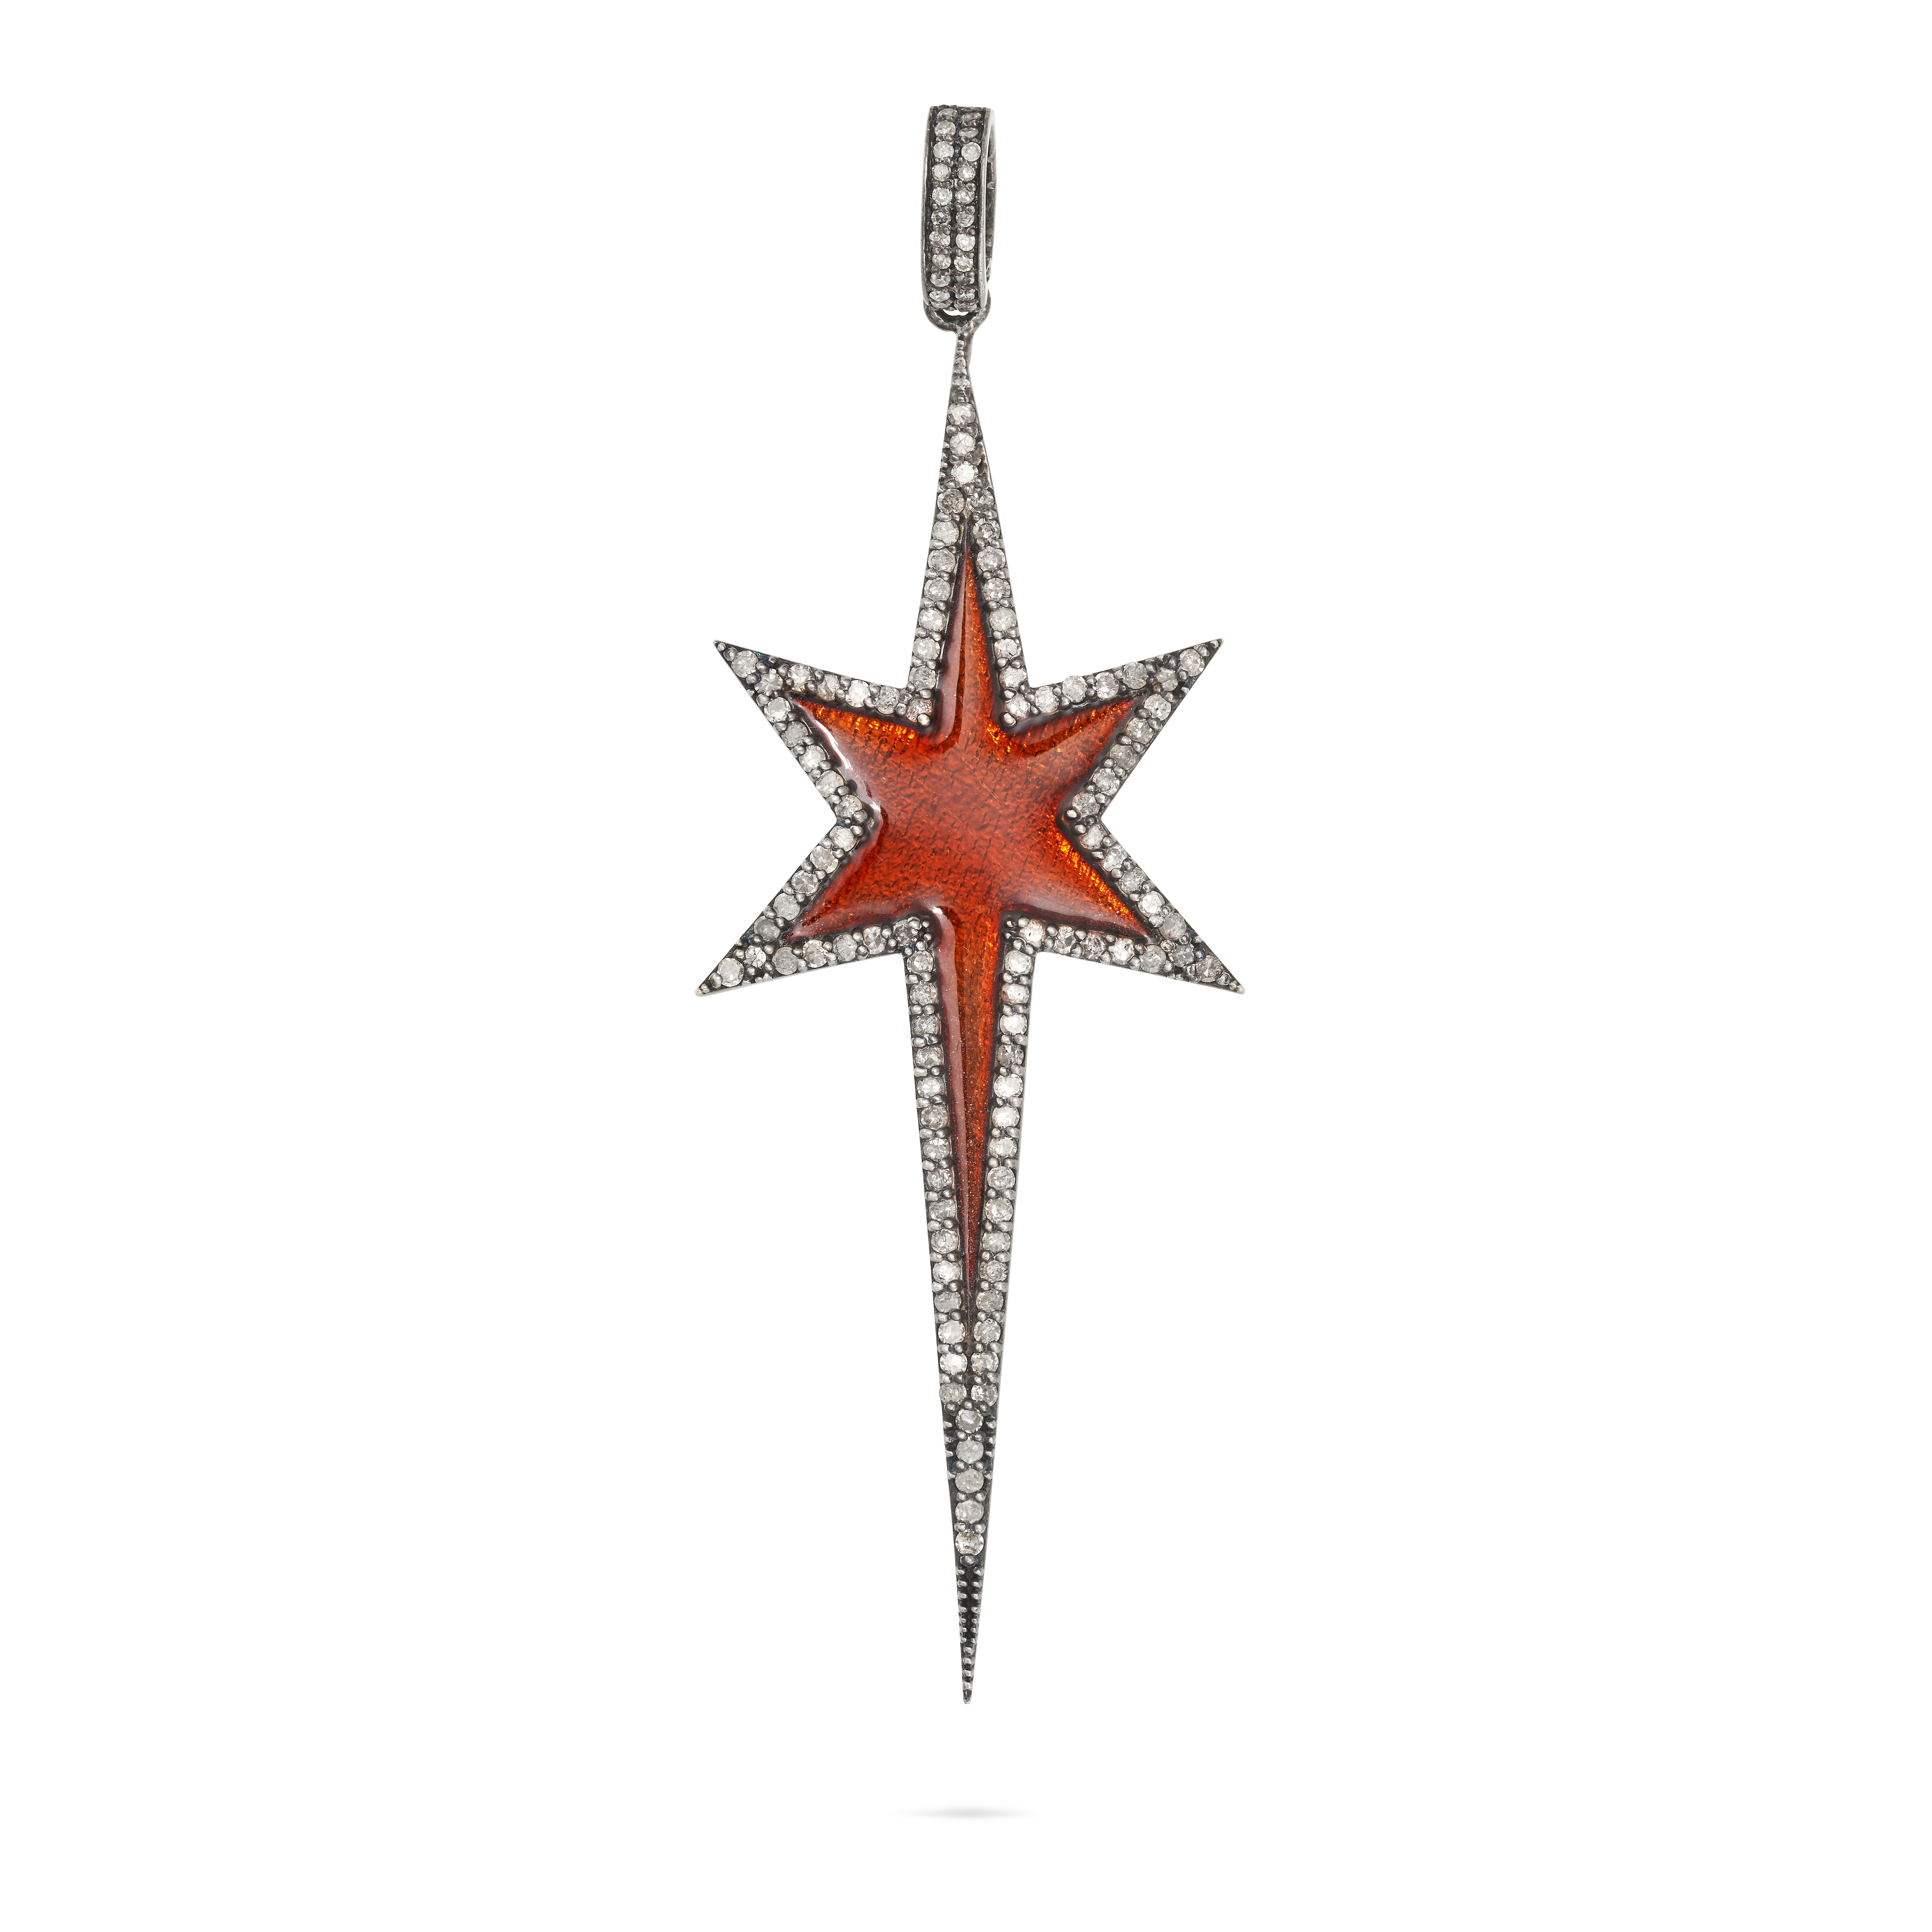 NO RESERVE - A DIAMOND AND ENAMEL STAR PENDANT designed as a star relived in orange enamel, accen...